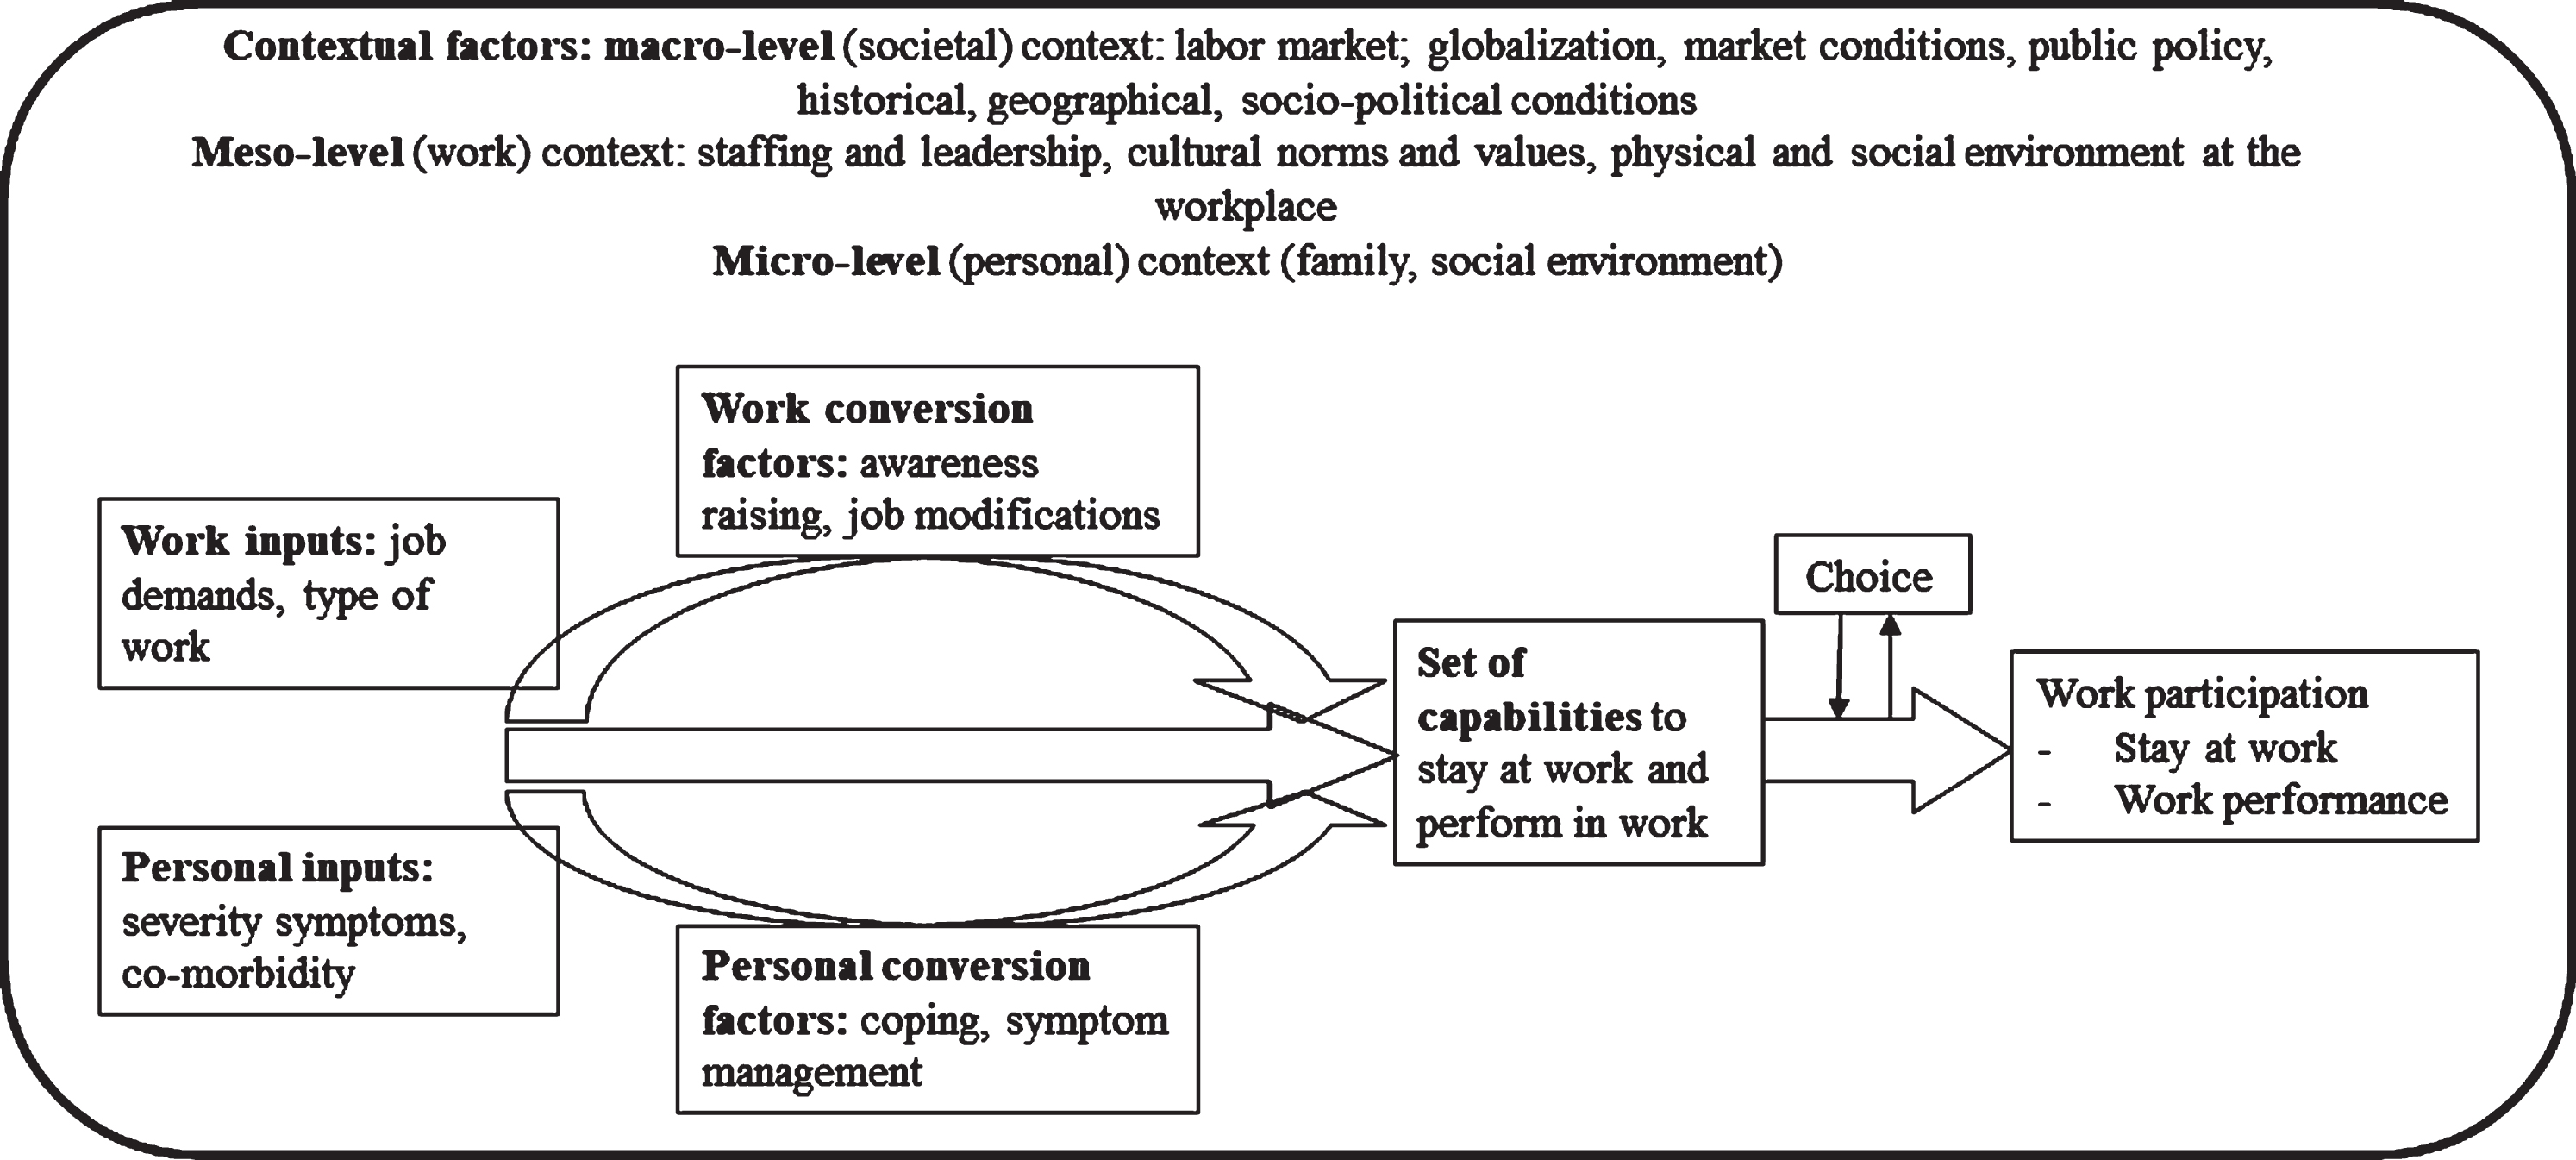 Model of the initial program theory on work participation, based on the Capability-for-Work model [38].